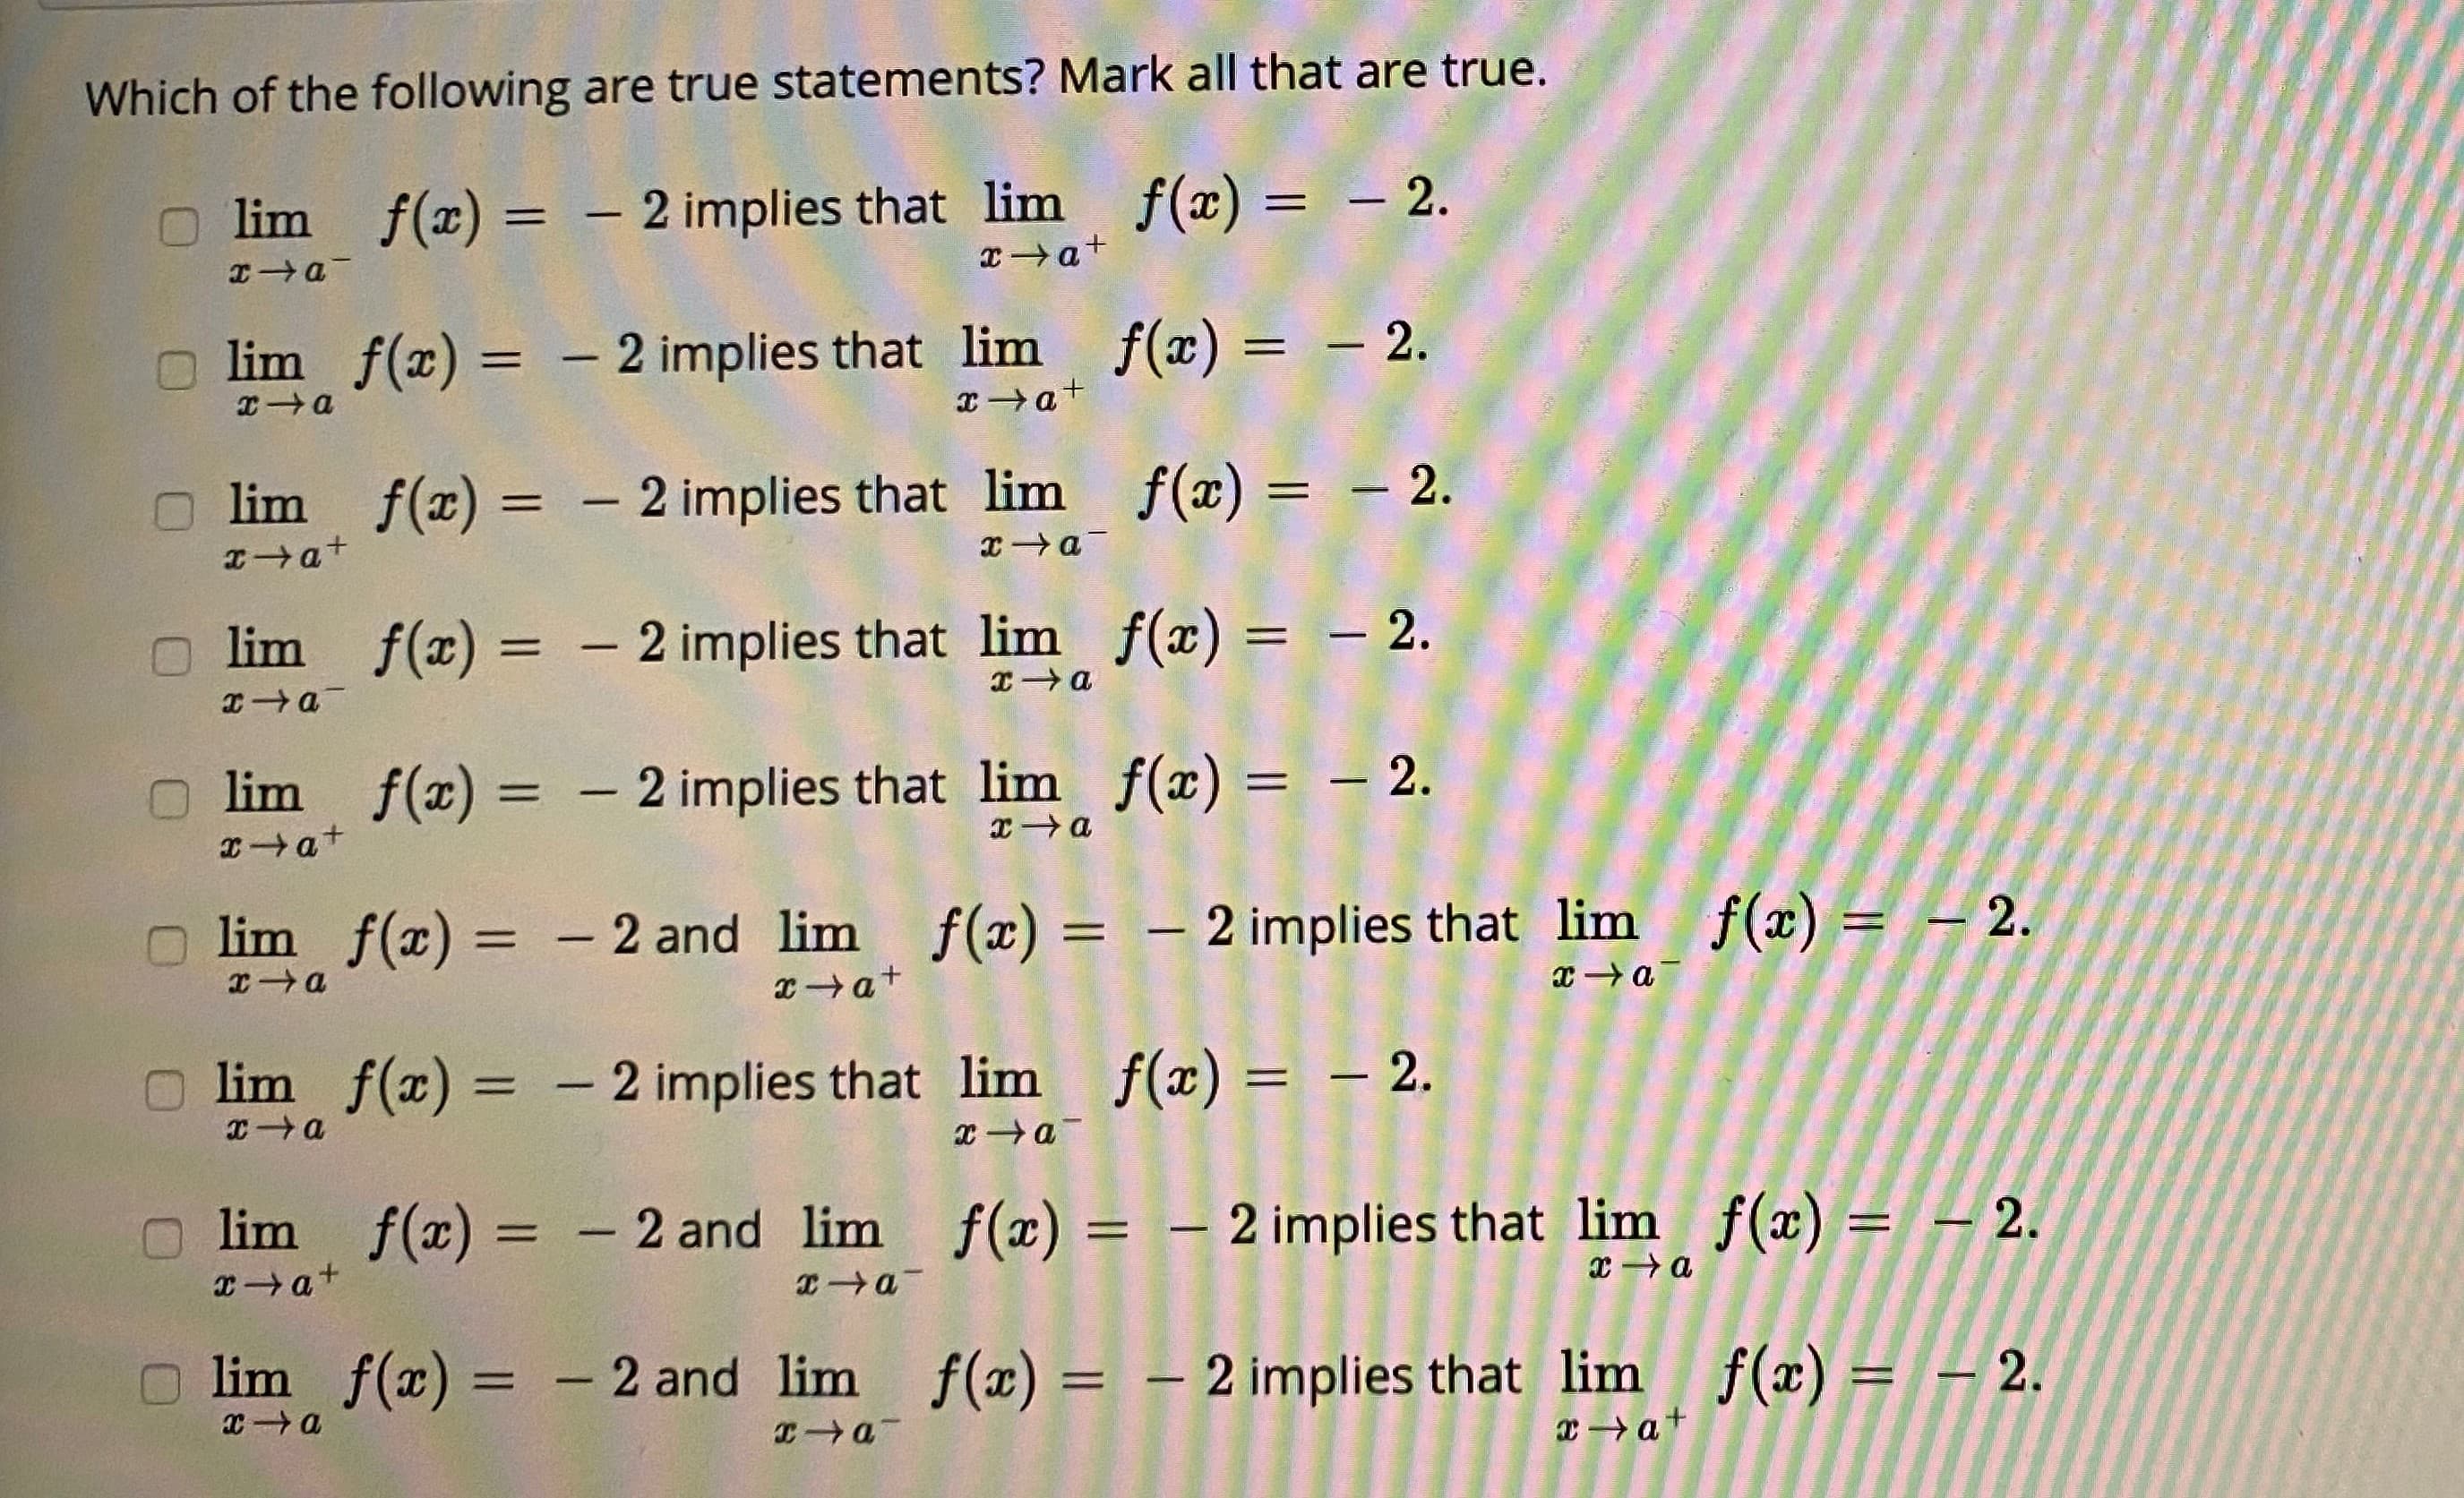 Which of the following are true statements? Mark all that are true.
lim f(x) = - 2 implies that lim f(x) = – 2.
%3D
|3|
|
|
xa+
lim f(x) = - 2 implies that lim f(x) = – 2.
%3D
lim f(x) = - 2 implies that lim f(x) = – 2.
lim f(x) = - 2 implies that lim f(x) = – 2.
%3D
%3D
lim f(x) = - 2 implies that lim f(x) = – 2.
lim f(x) = - 2 and lim f(x) = – 2 implies that lim f(x) = - 2.
xa+
x a
O lim f(x) = – 2 implies that lim f(x) = – 2.
エ→Q
lim f(x) = - 2 and lim f(x) = – 2 implies that lim f(x) = - 2.
%3D
%3D
xa+
lim f(x) = - 2 and lim f(x) = – 2 implies that lim f(x) = - 2.
%3D
%3D
